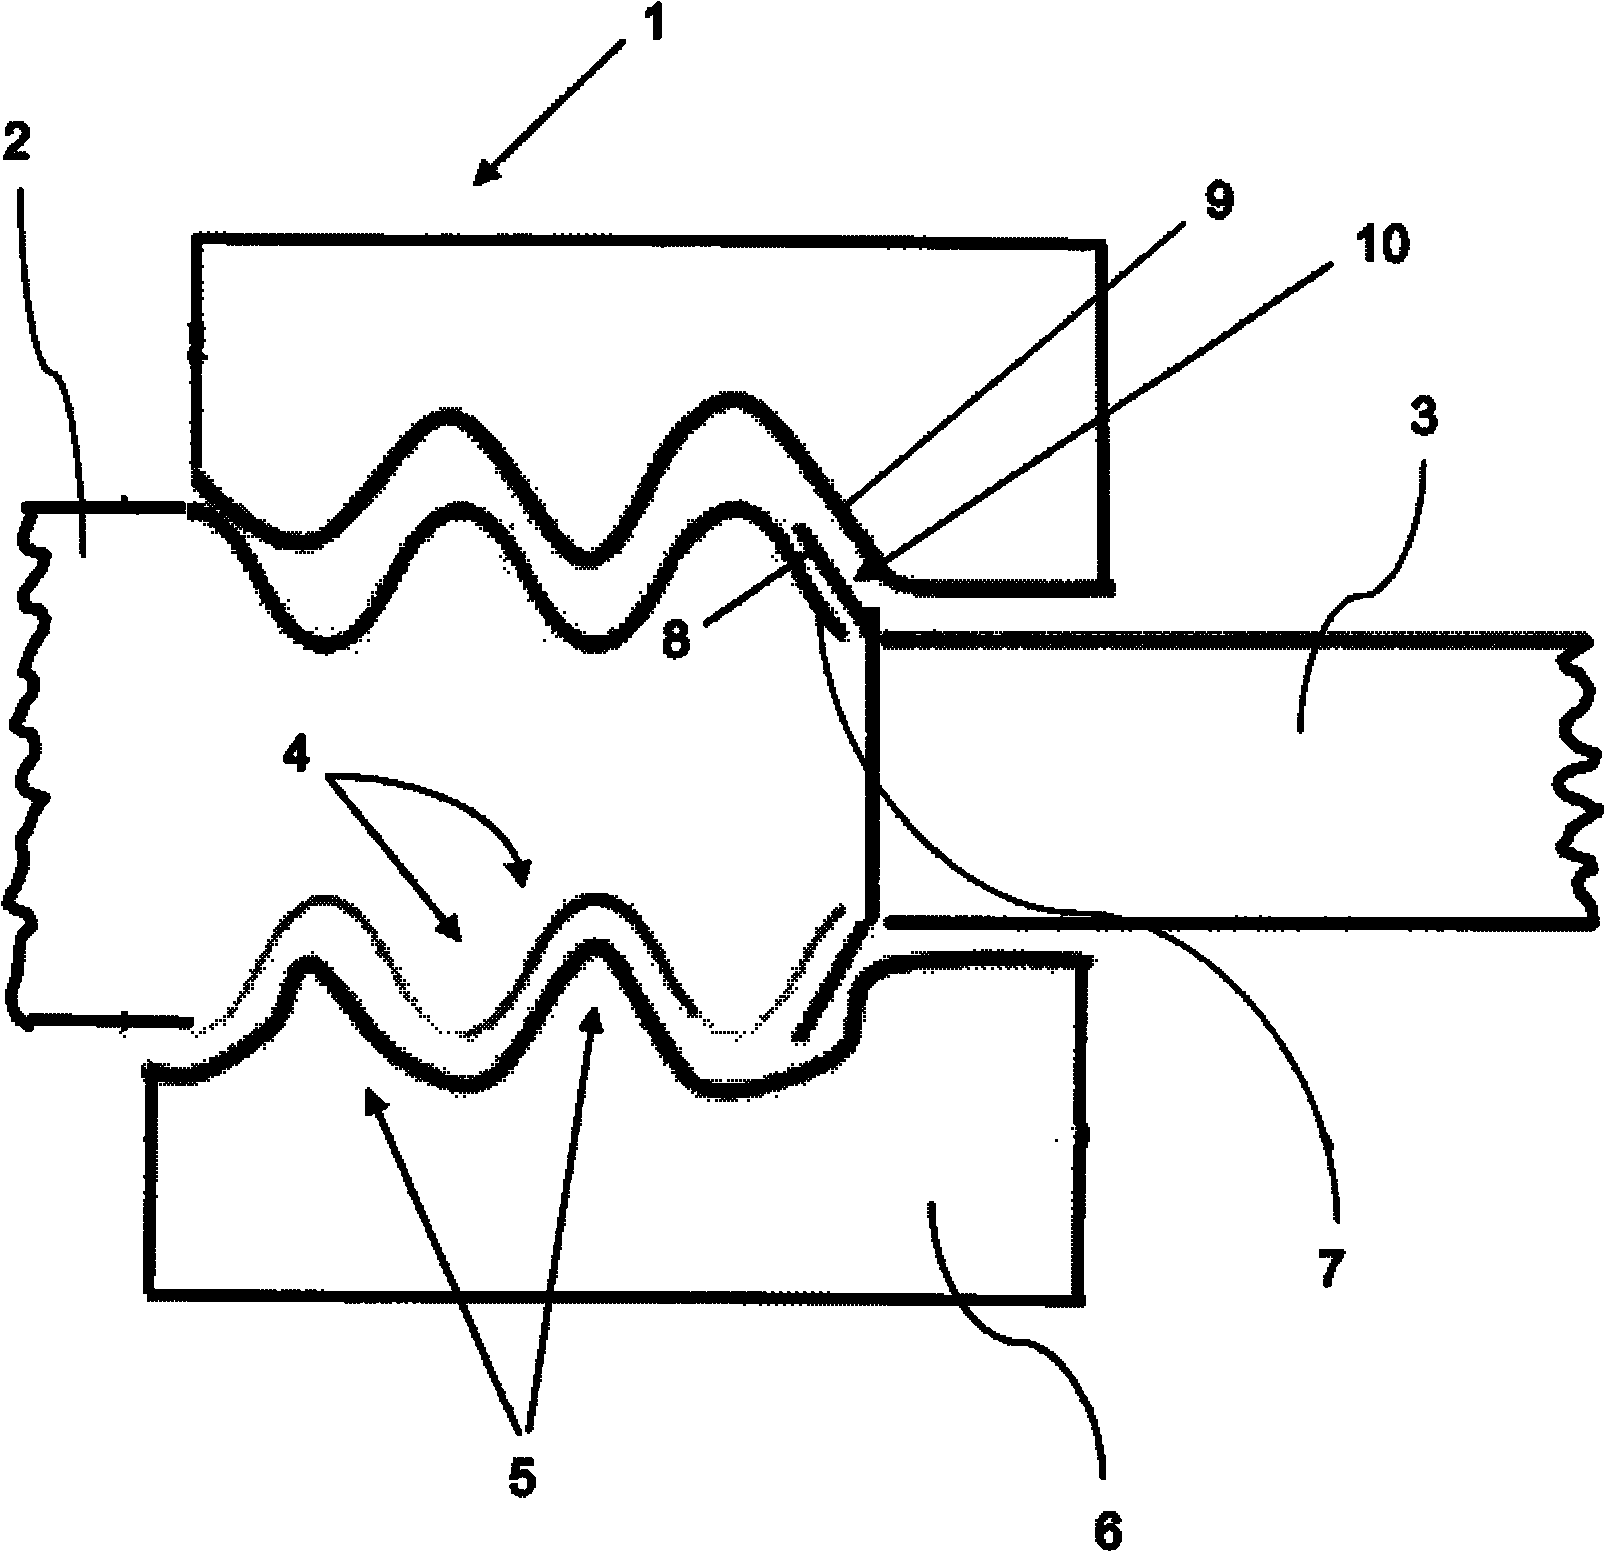 Pipe connection for connecting pipes of a motor vehicle, exhaust system, air intake system and motor vehicle